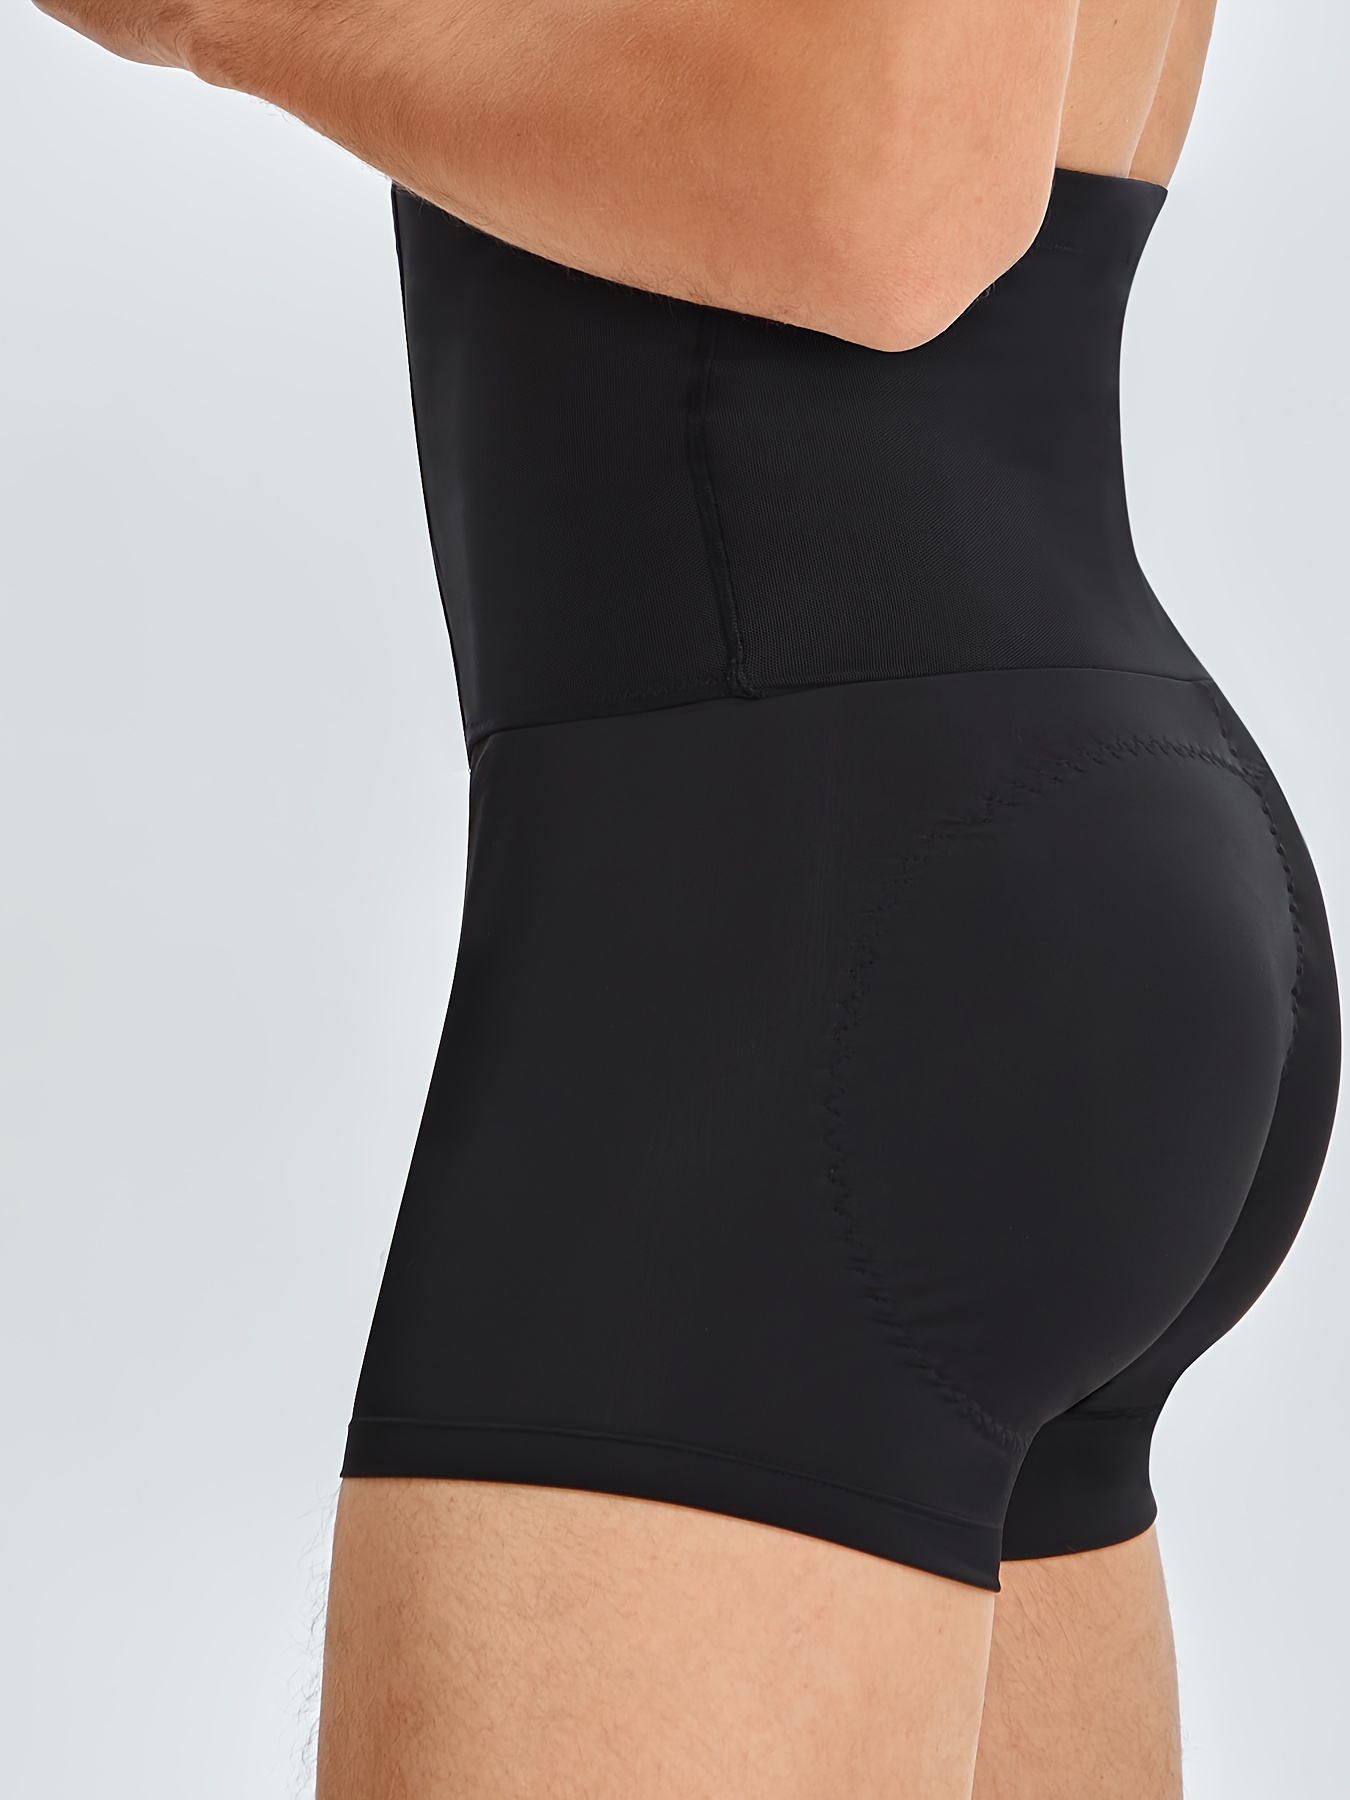 Scarboro Men's High Waist Butt Lifter Tummy Control Slimming